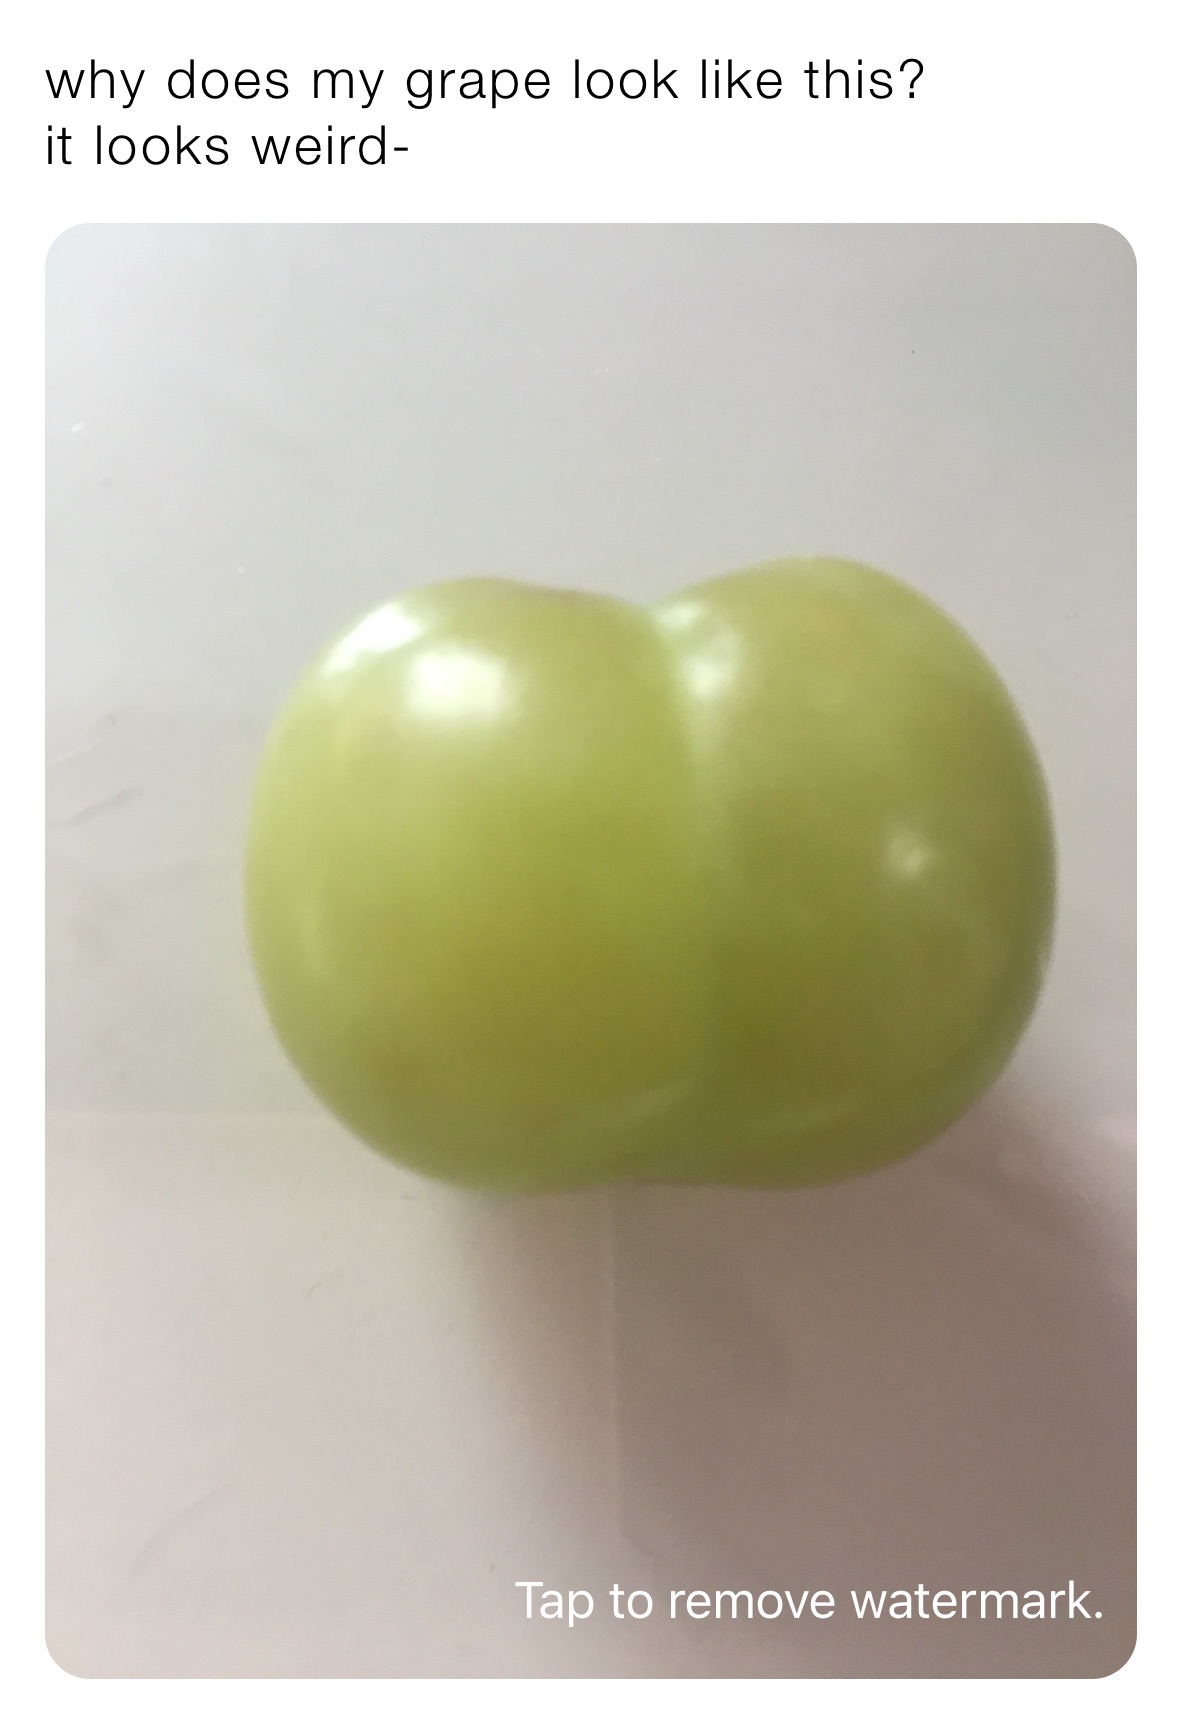 why does my grape look like this?
it looks weird-